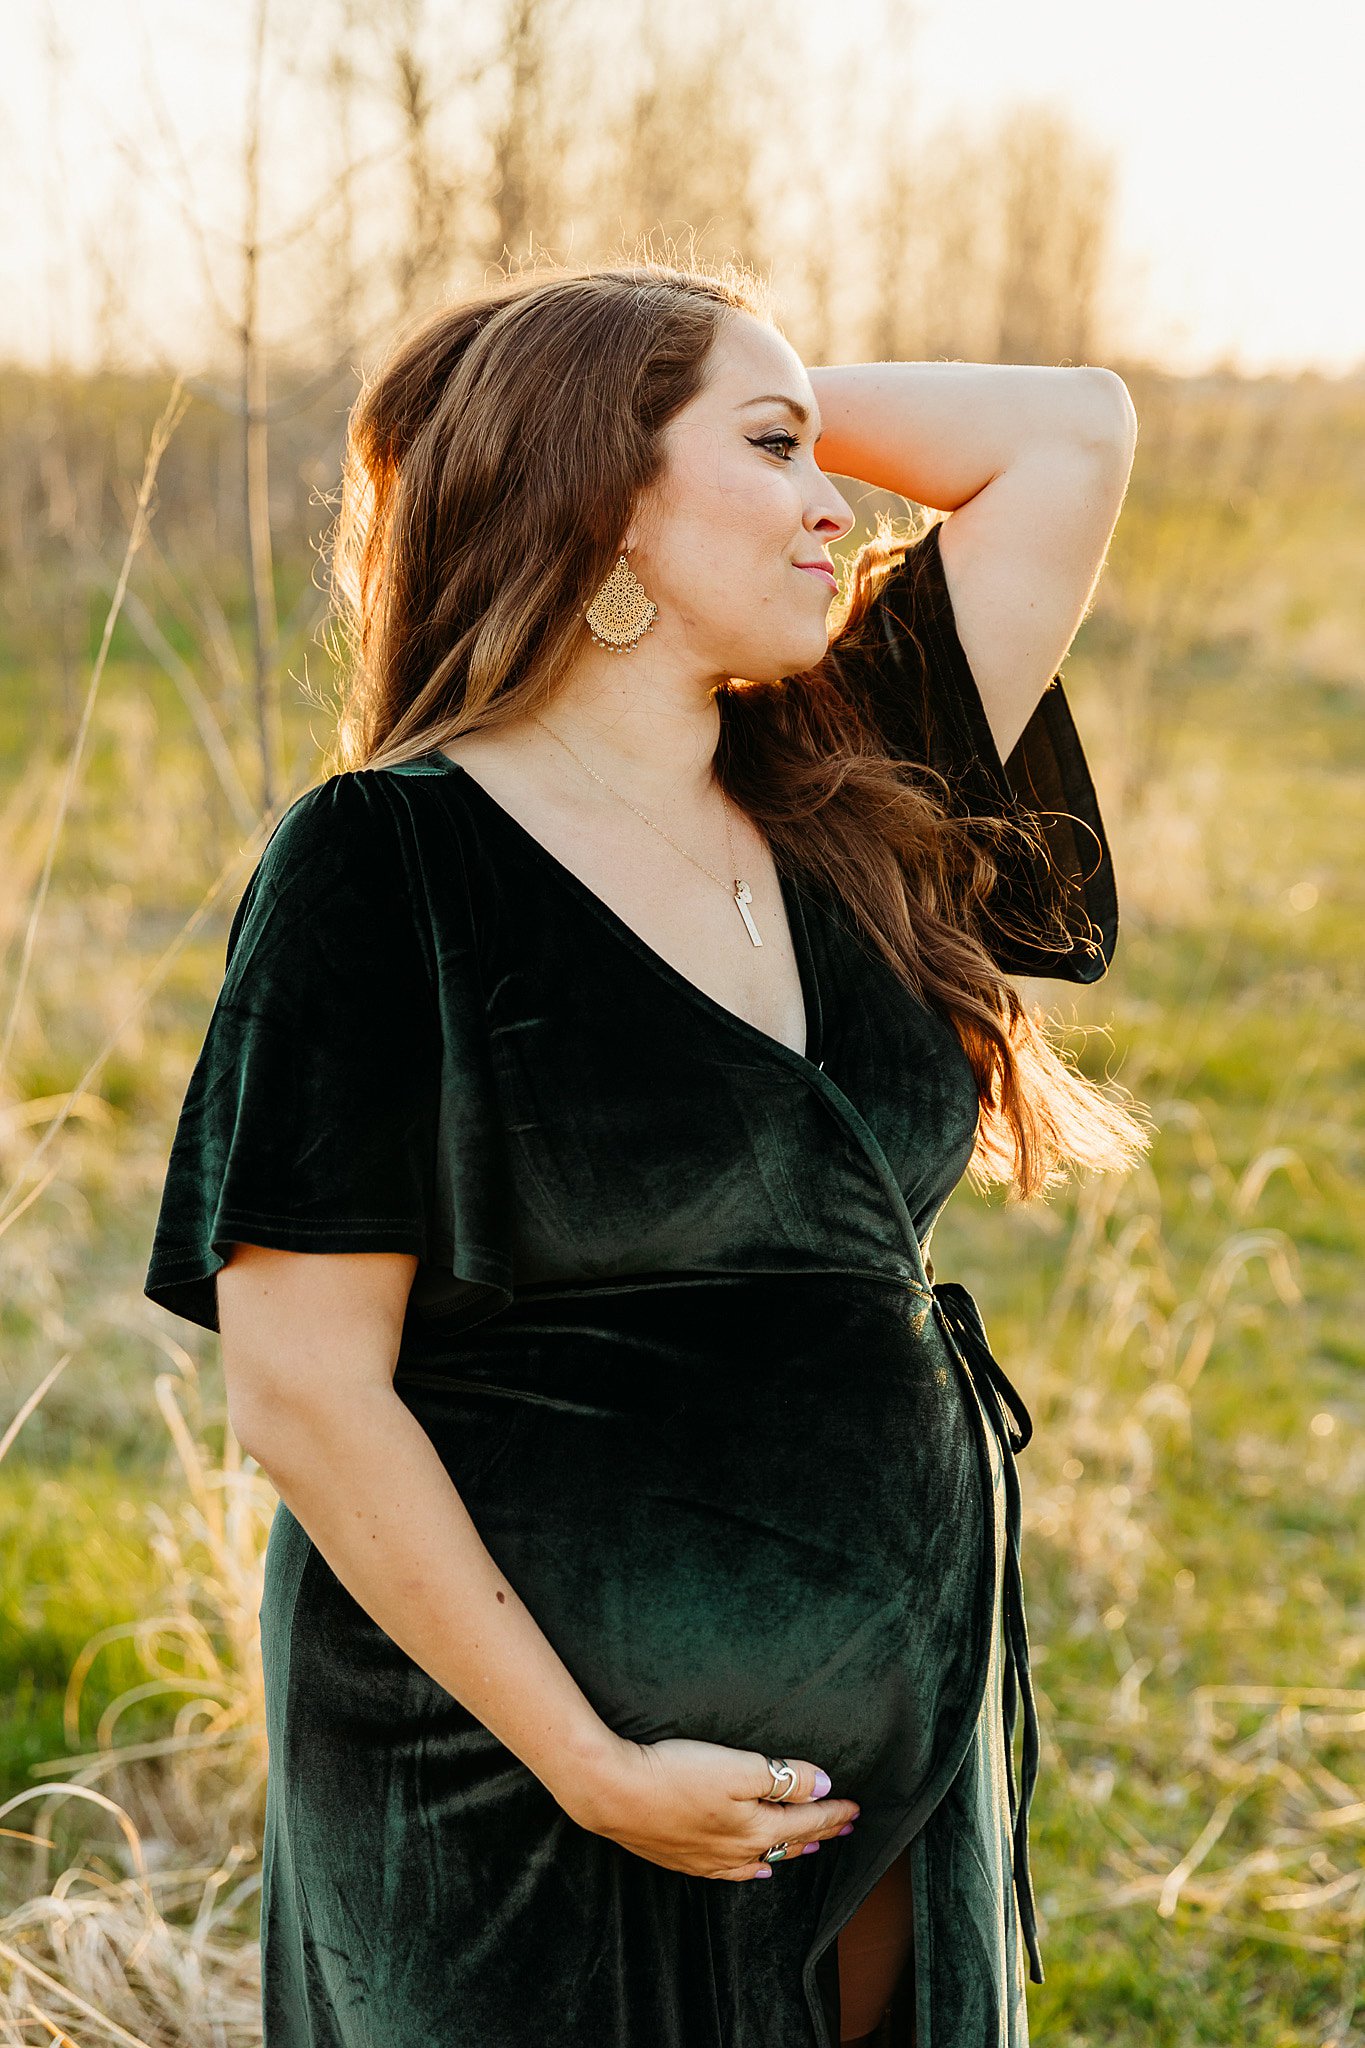 A mother to be in a green velvet dress stands in a grassy field New beginnings pregnancy center